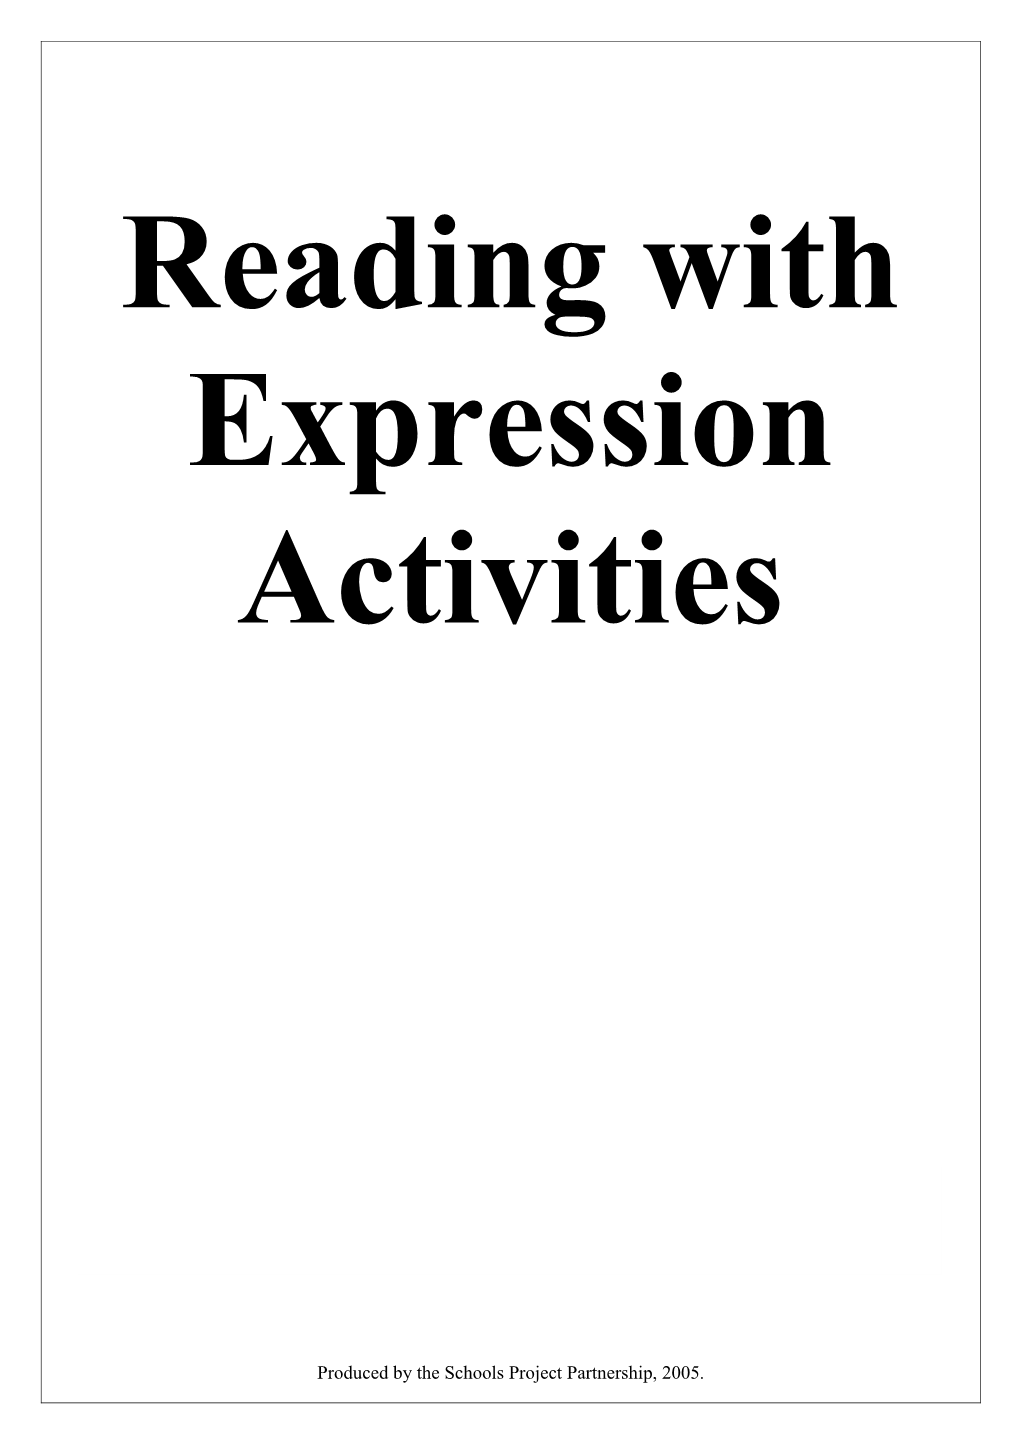 Small Group Activity: Introduction to Reading with Expression